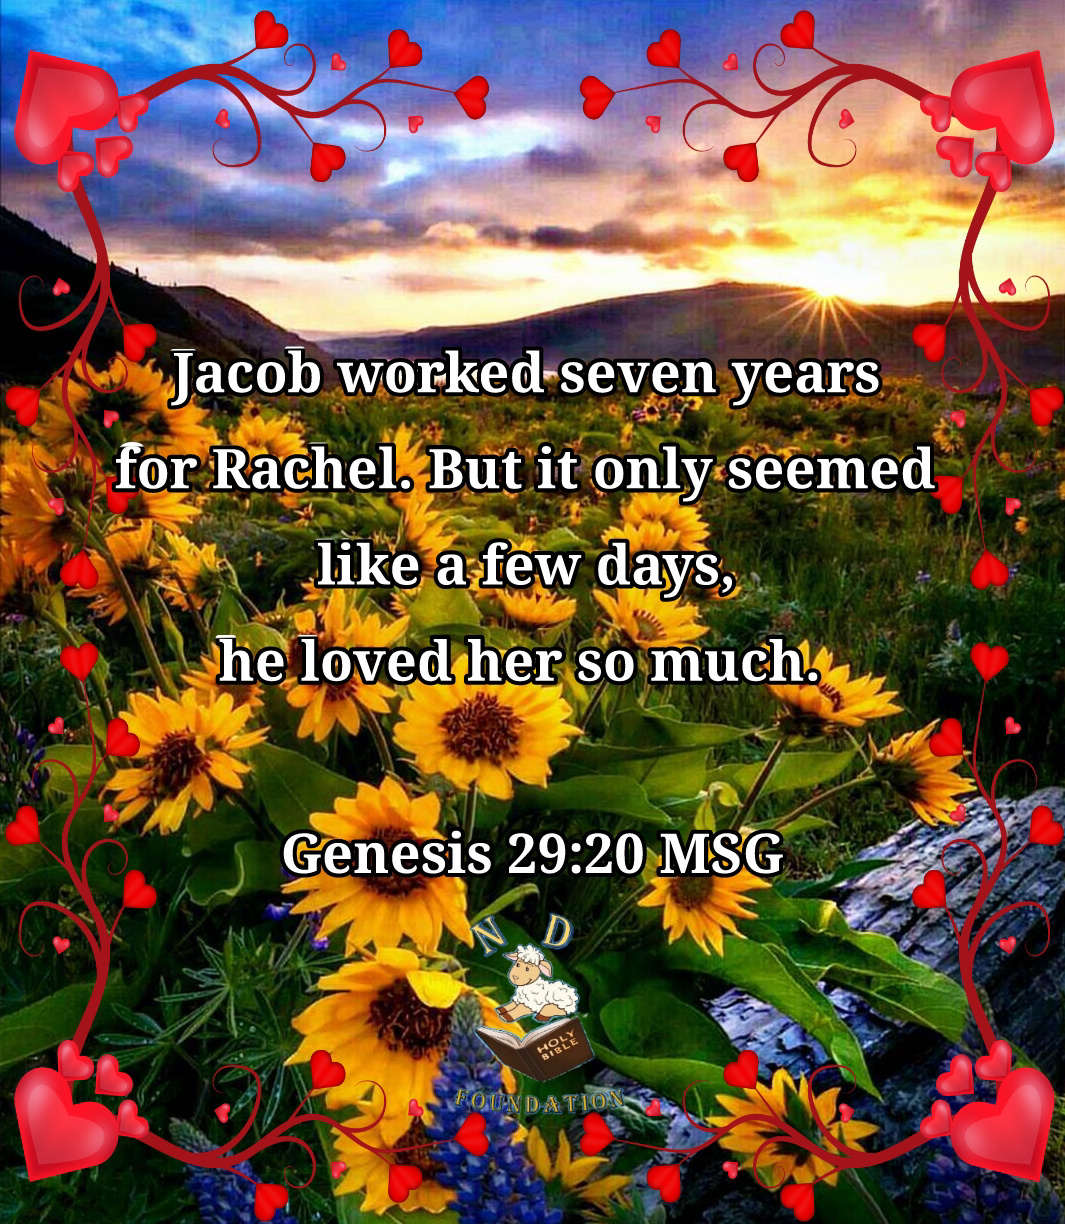 So Jacob worked seven years for Rachel. But it only seemed like a few days, he loved her so much. Genesis 29:20 MSG